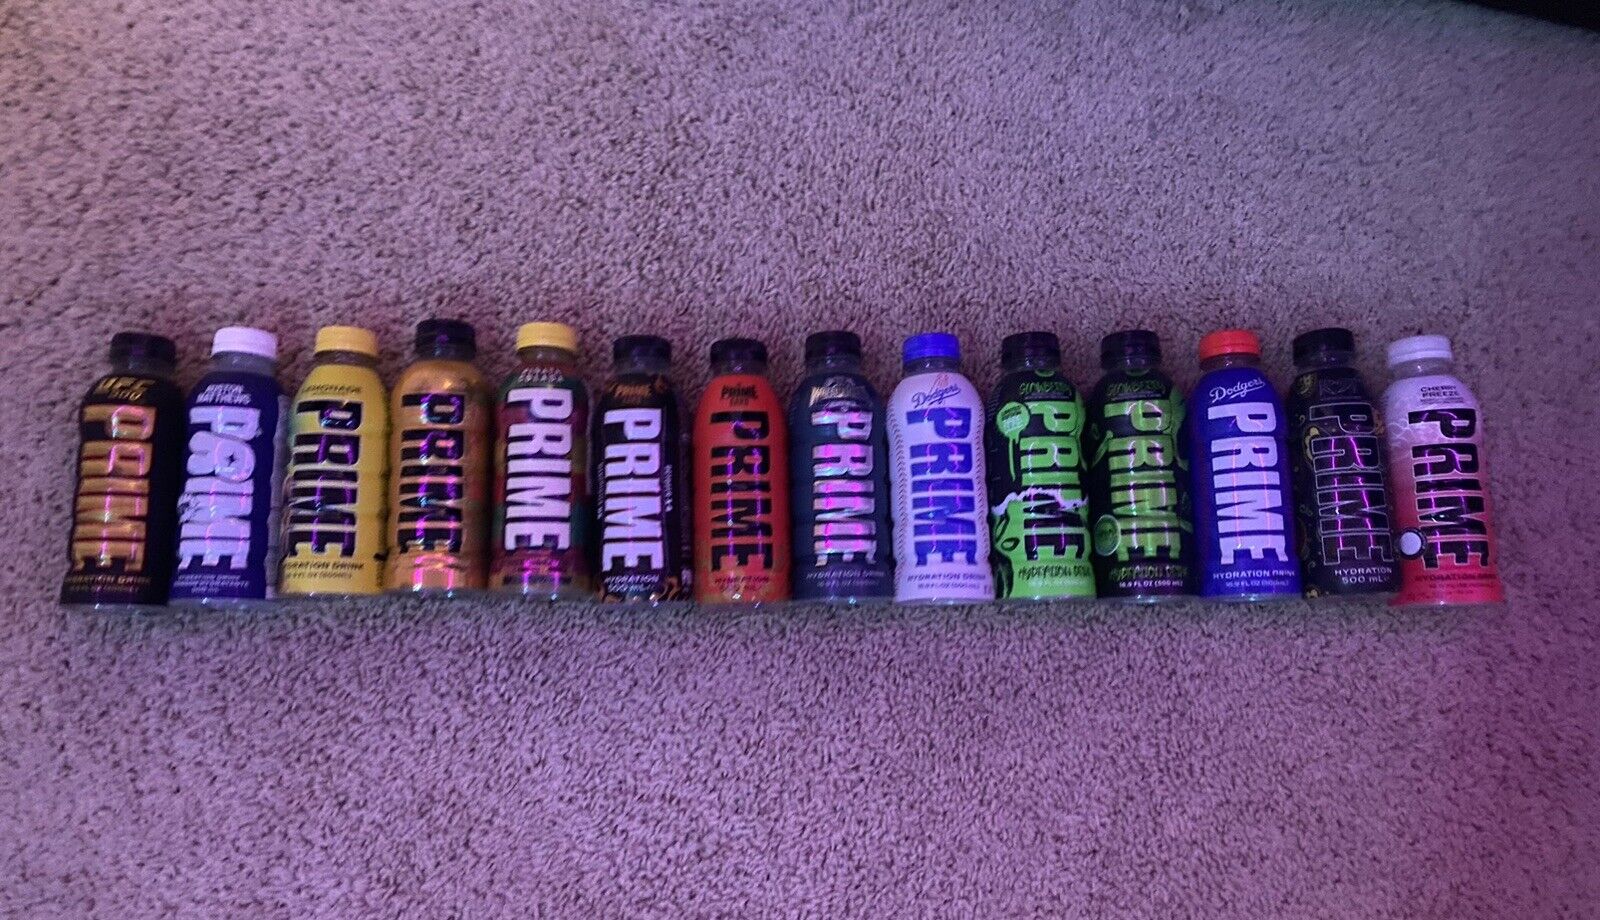 250+ PRIME HYDRATION, ENERGY, AND HYDRATION+ COLLECTION RARE KSI AND LOGAN PAUL